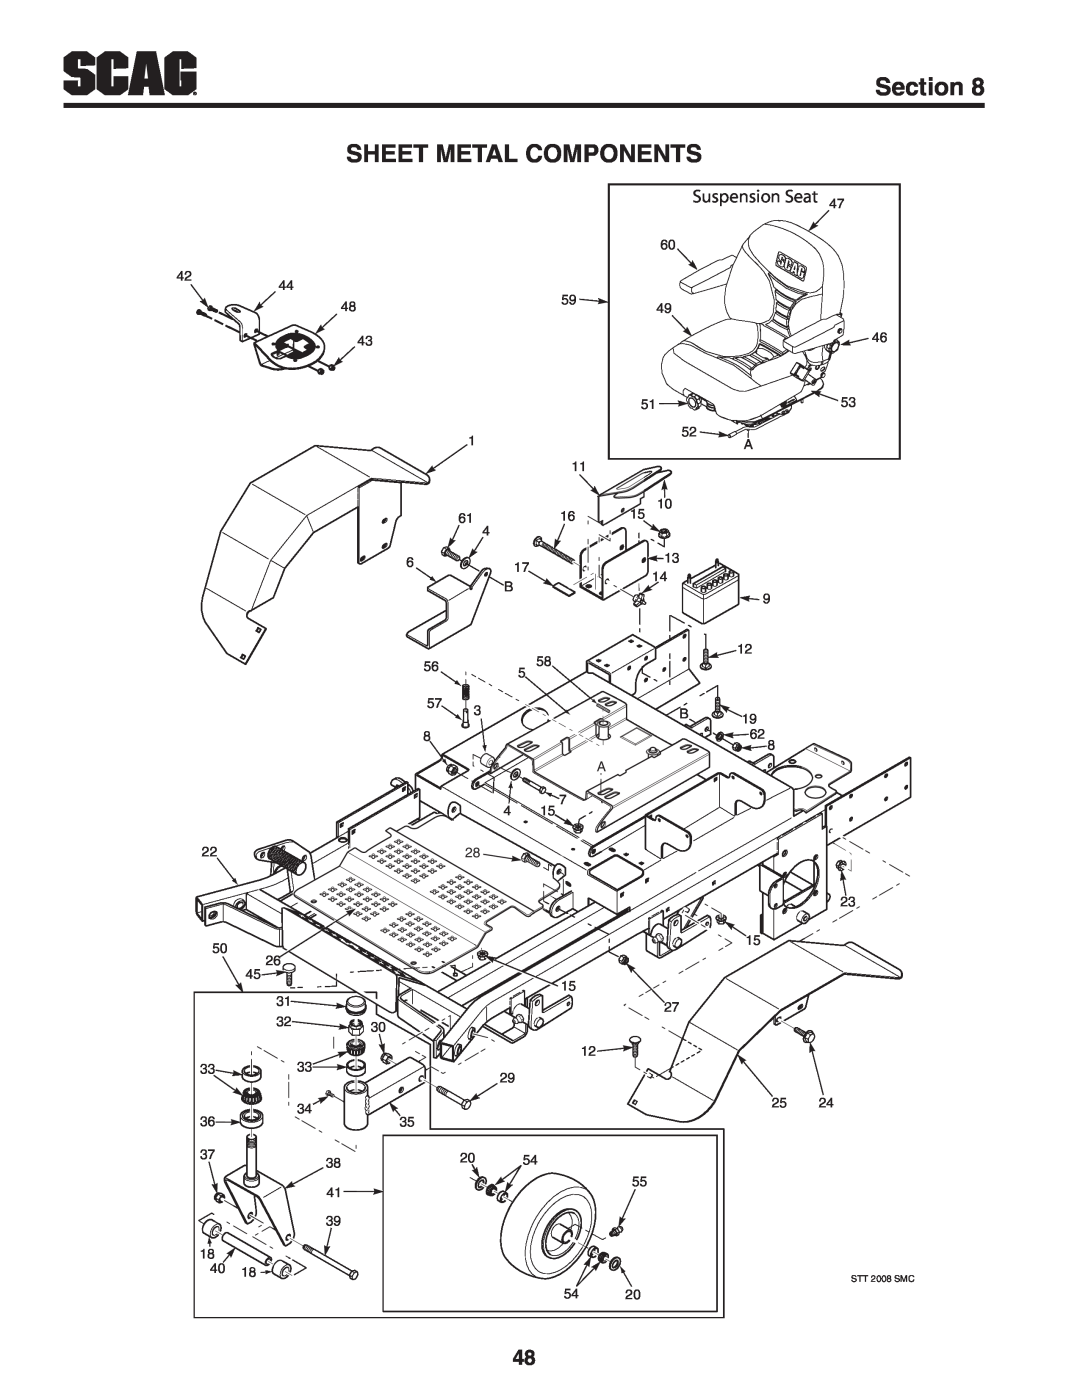 Scag Power Equipment STT-31EFI-SS operating instructions Sheet Metal Components, Section, Suspension Seat, STT 2008 SMC 